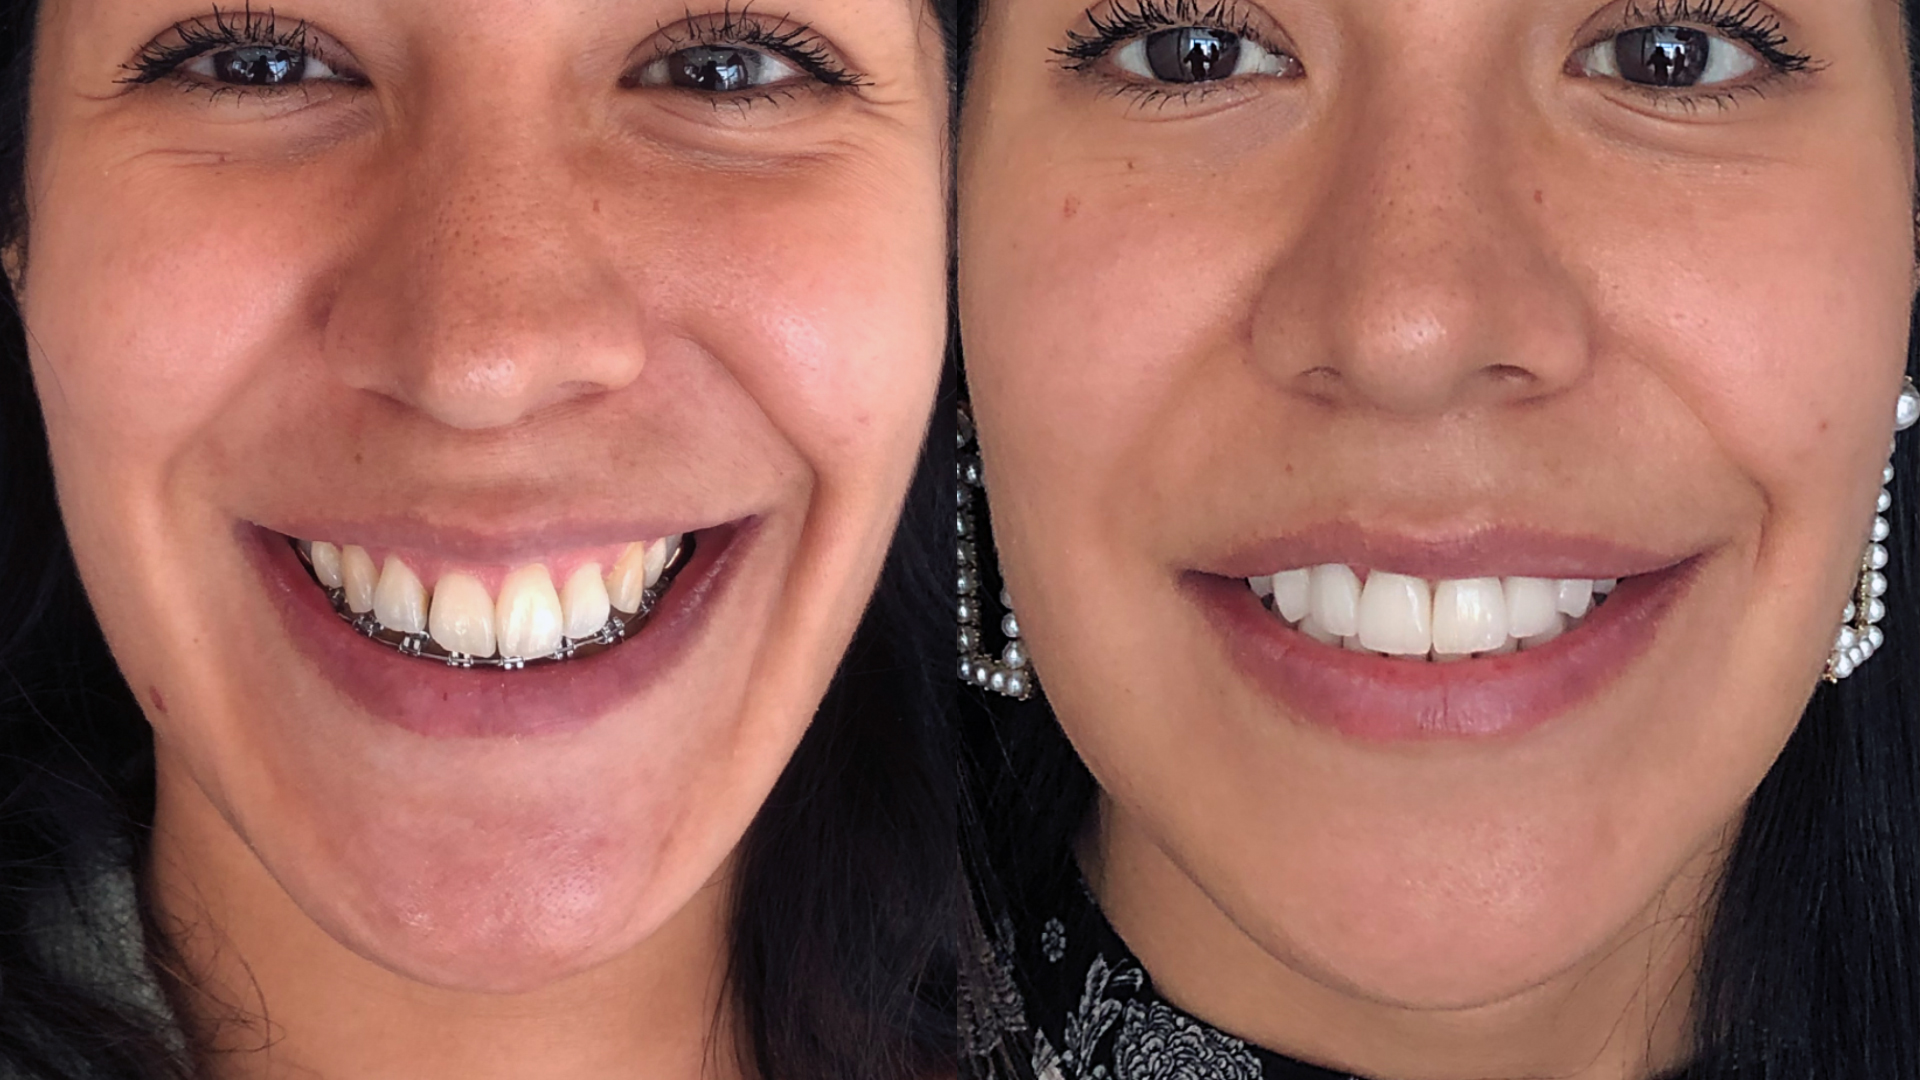 A picture of the same woman before and after a cosmetic dentistry procedure called “Hollywood Smile”